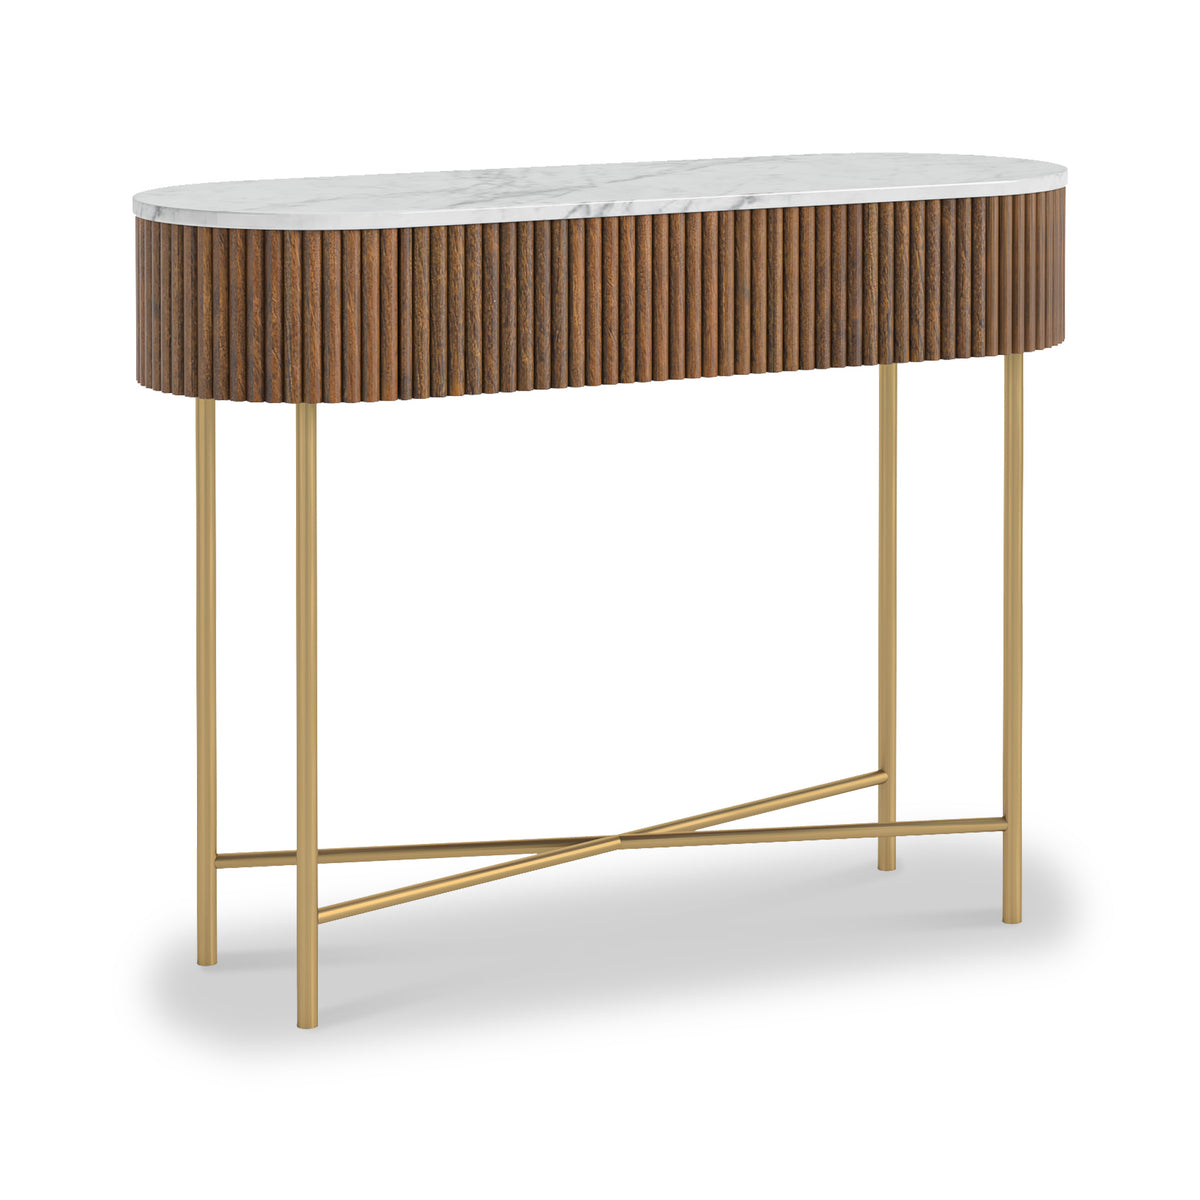 Milo Mango & Marble Walnut Fluted Console Table from Roseland Furniture